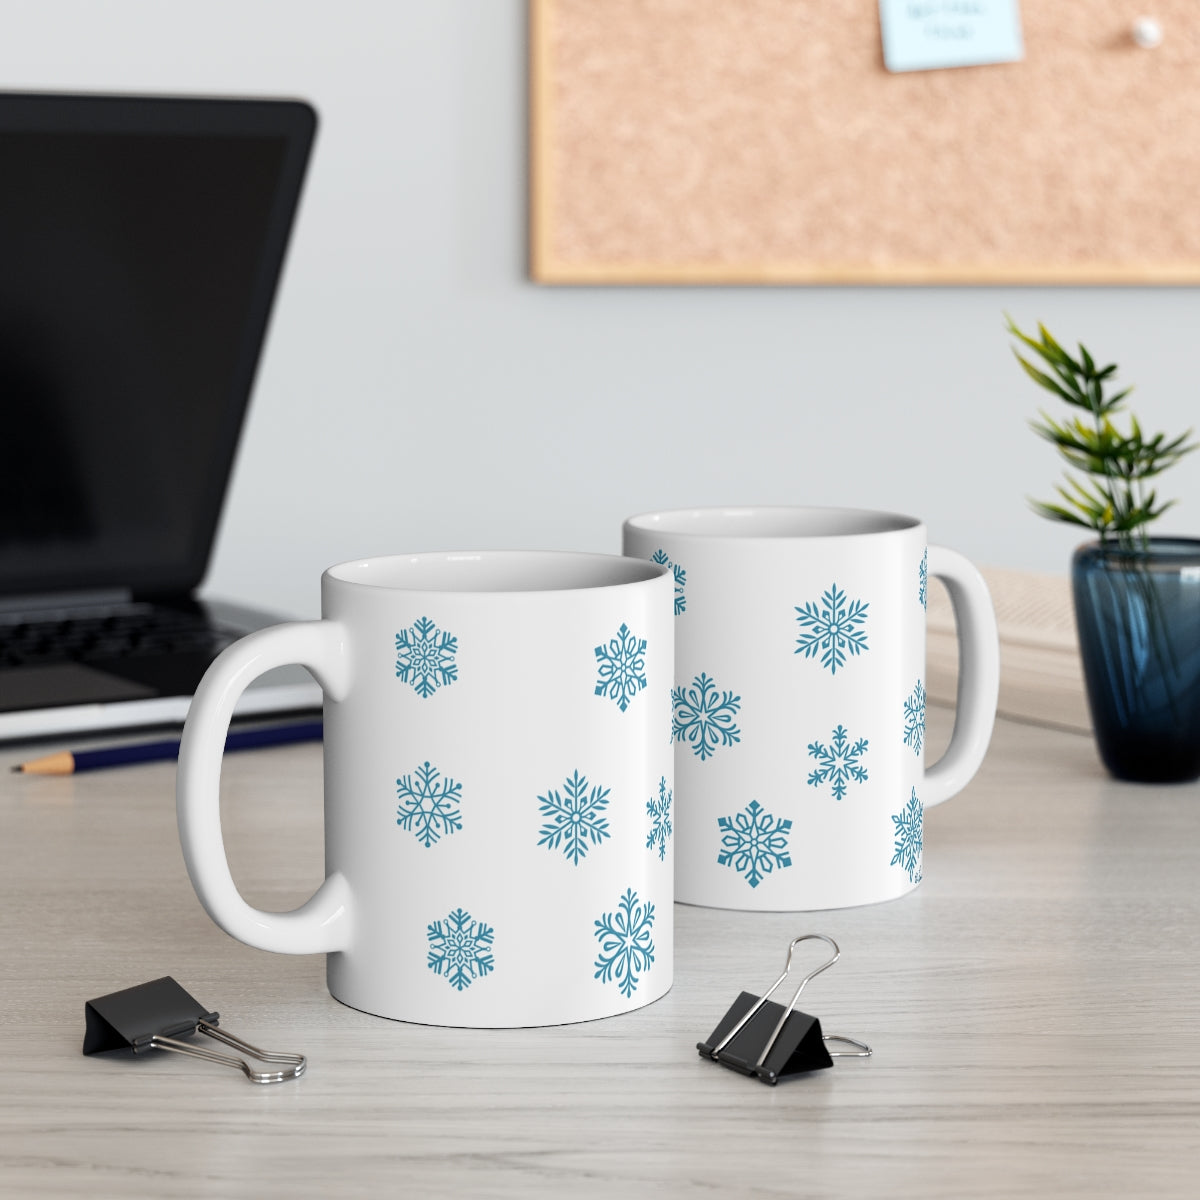 Mock up of 2 mugs on a surface with a laptop computer in the background